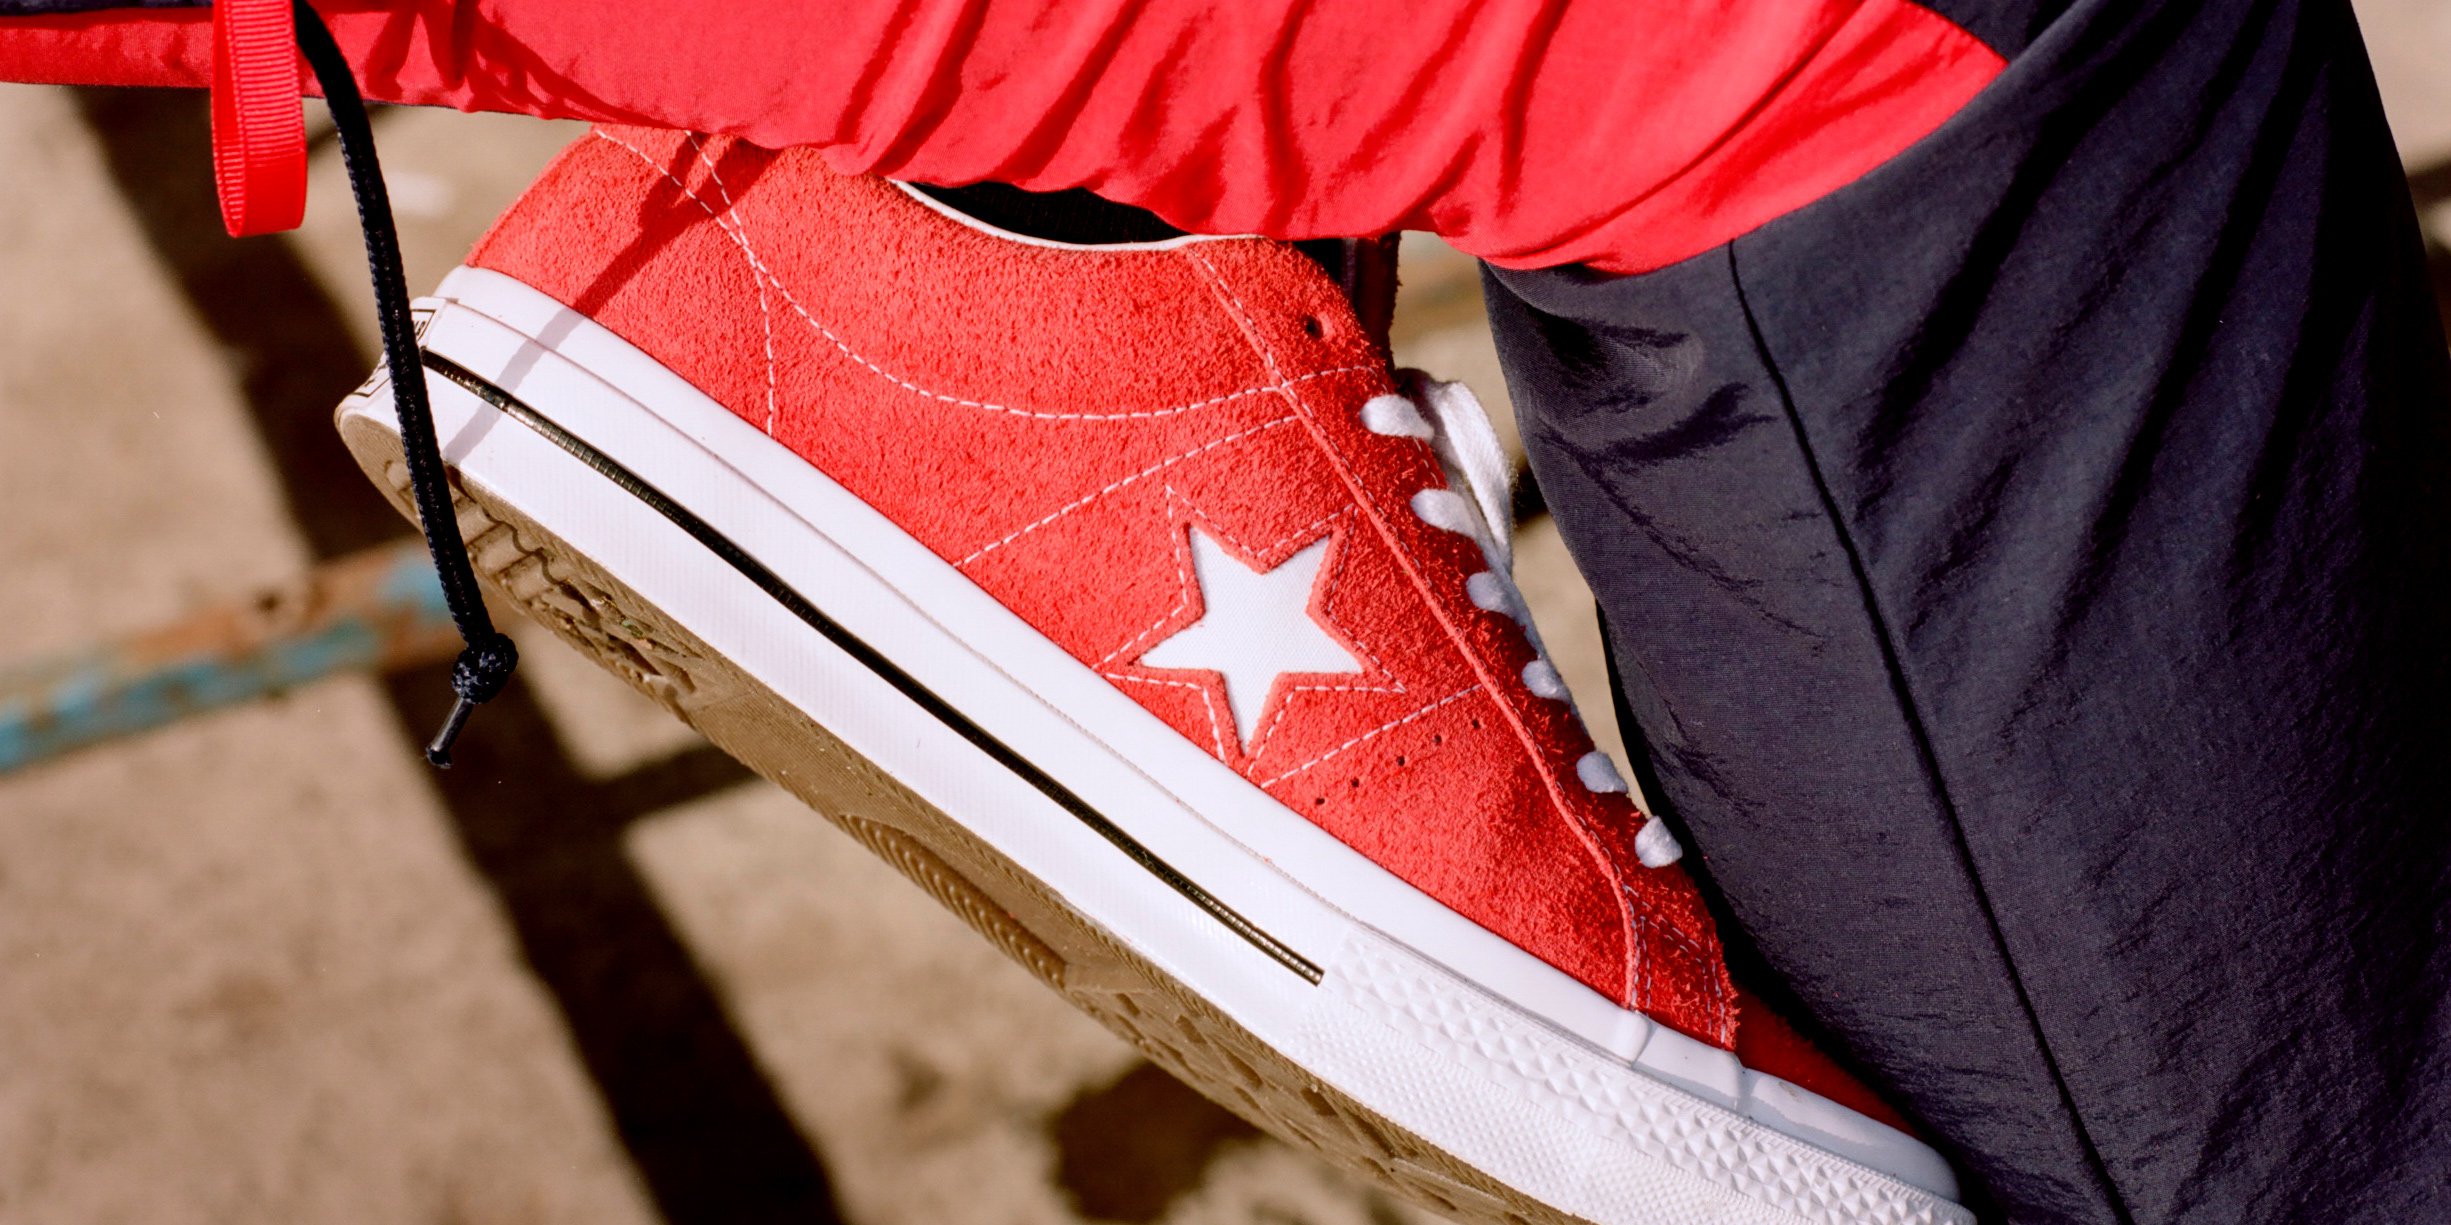 SNS on Twitter: "Sneakersnstuff presents Converse One Star. https://t.co/wF91K0q8ly / Twitter